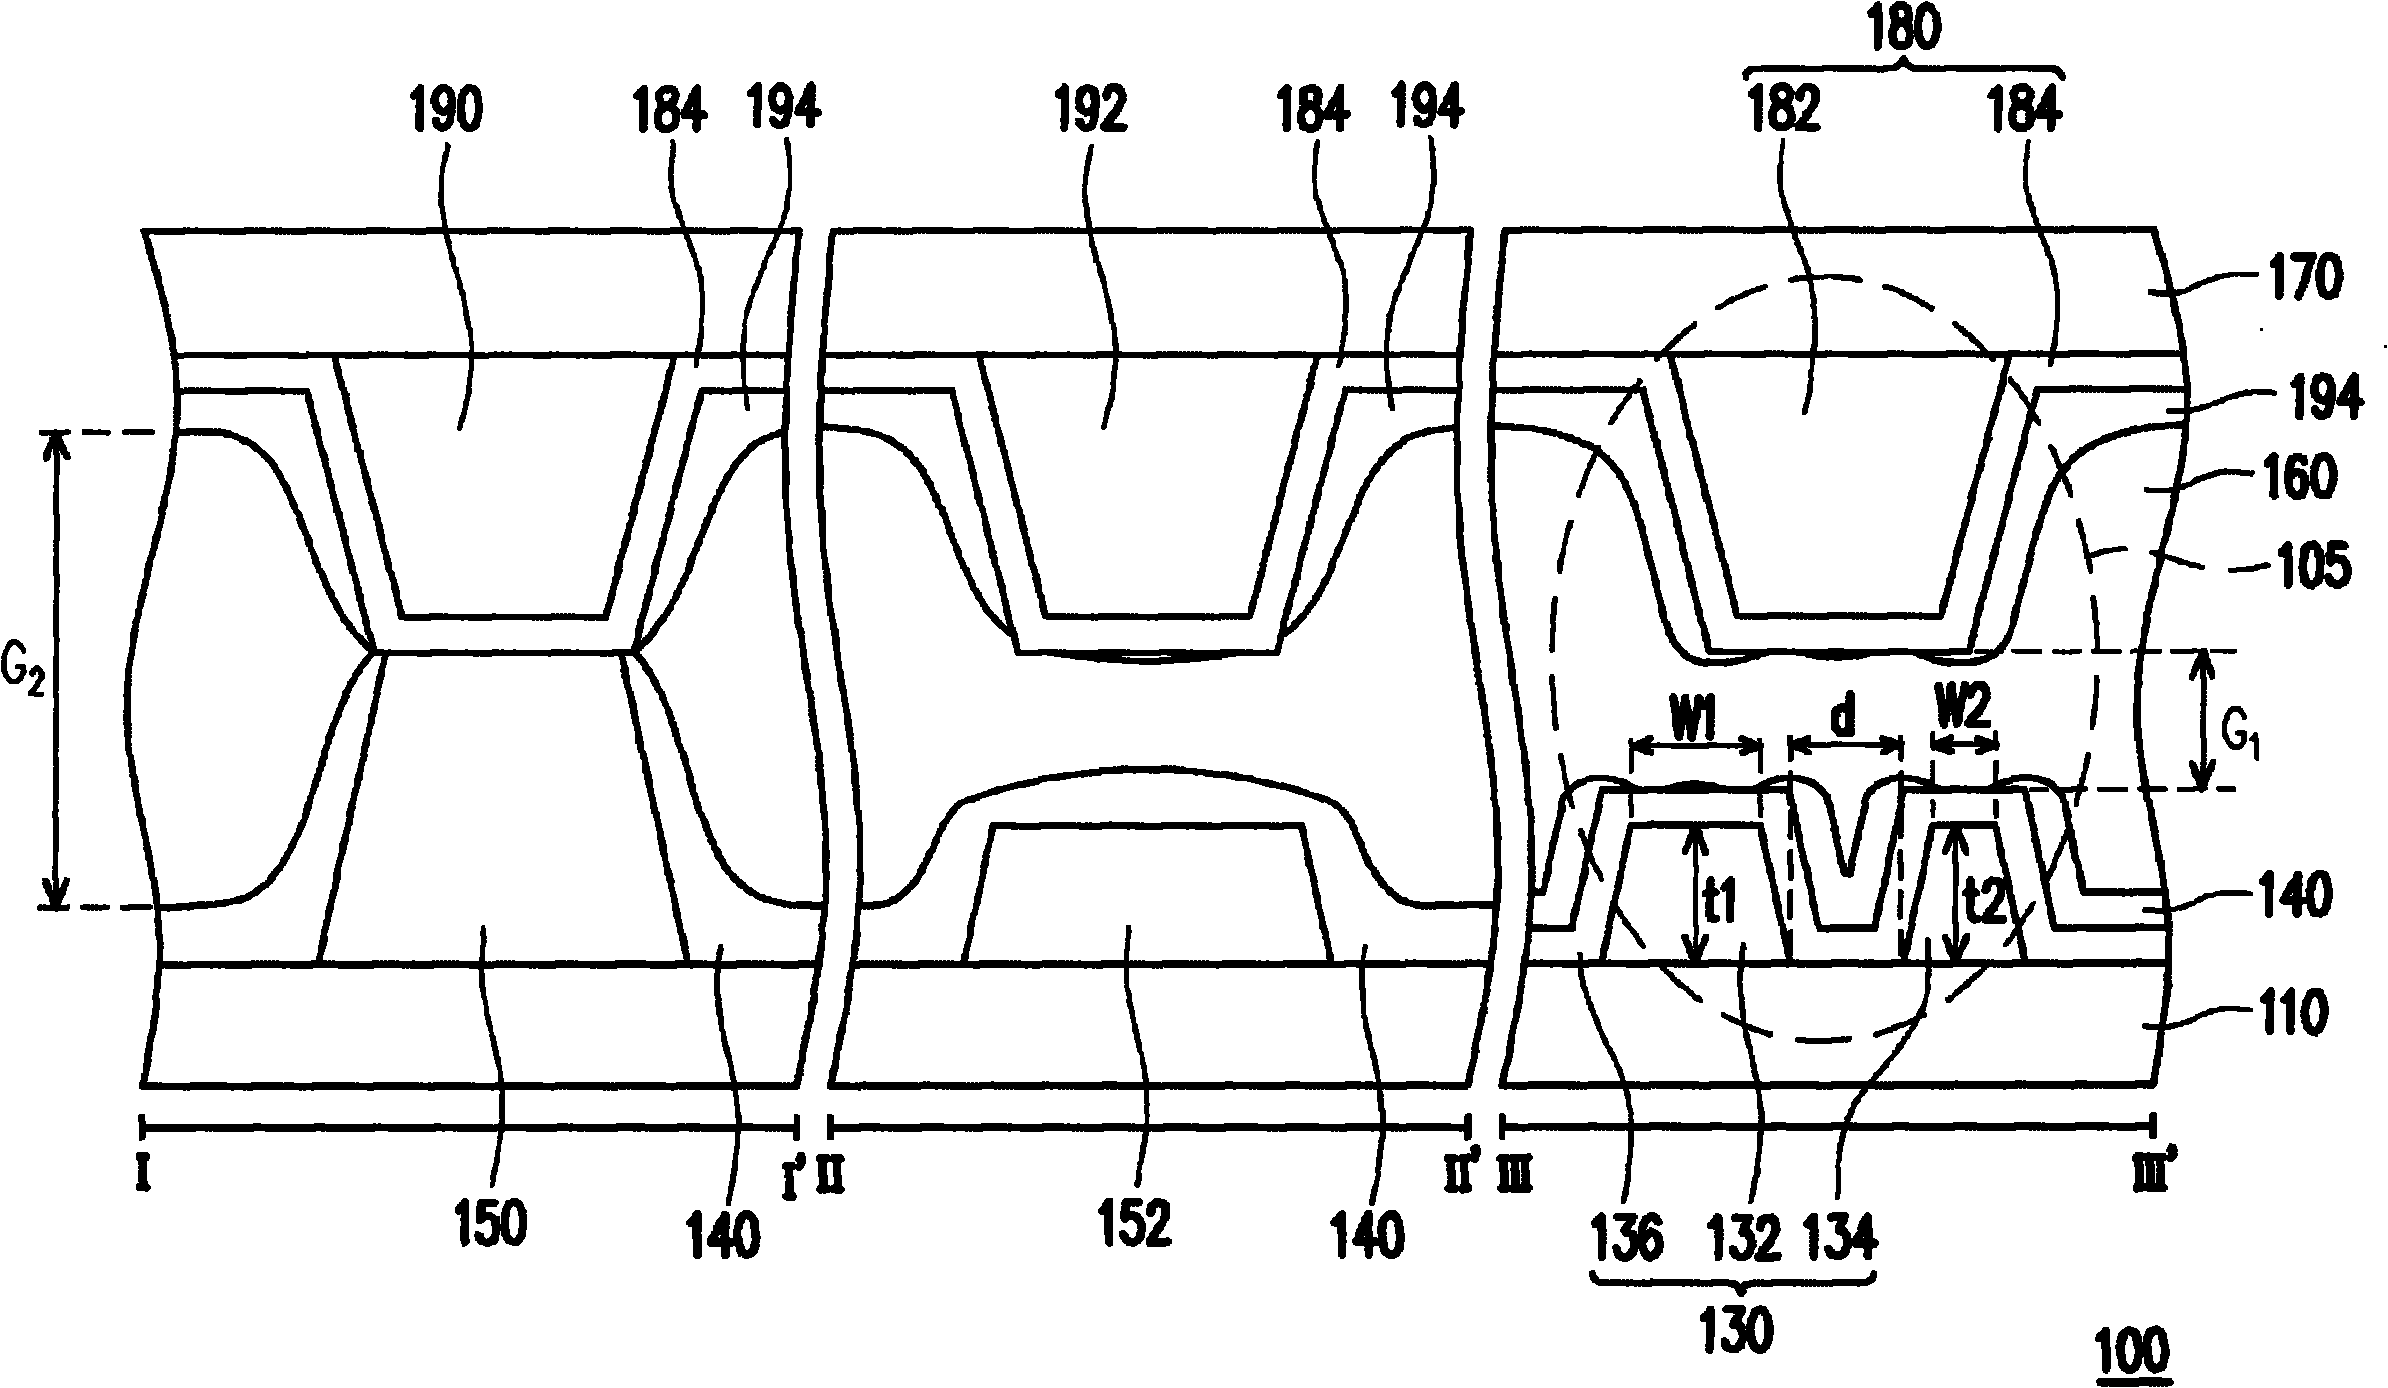 Induction structure and touch display panel